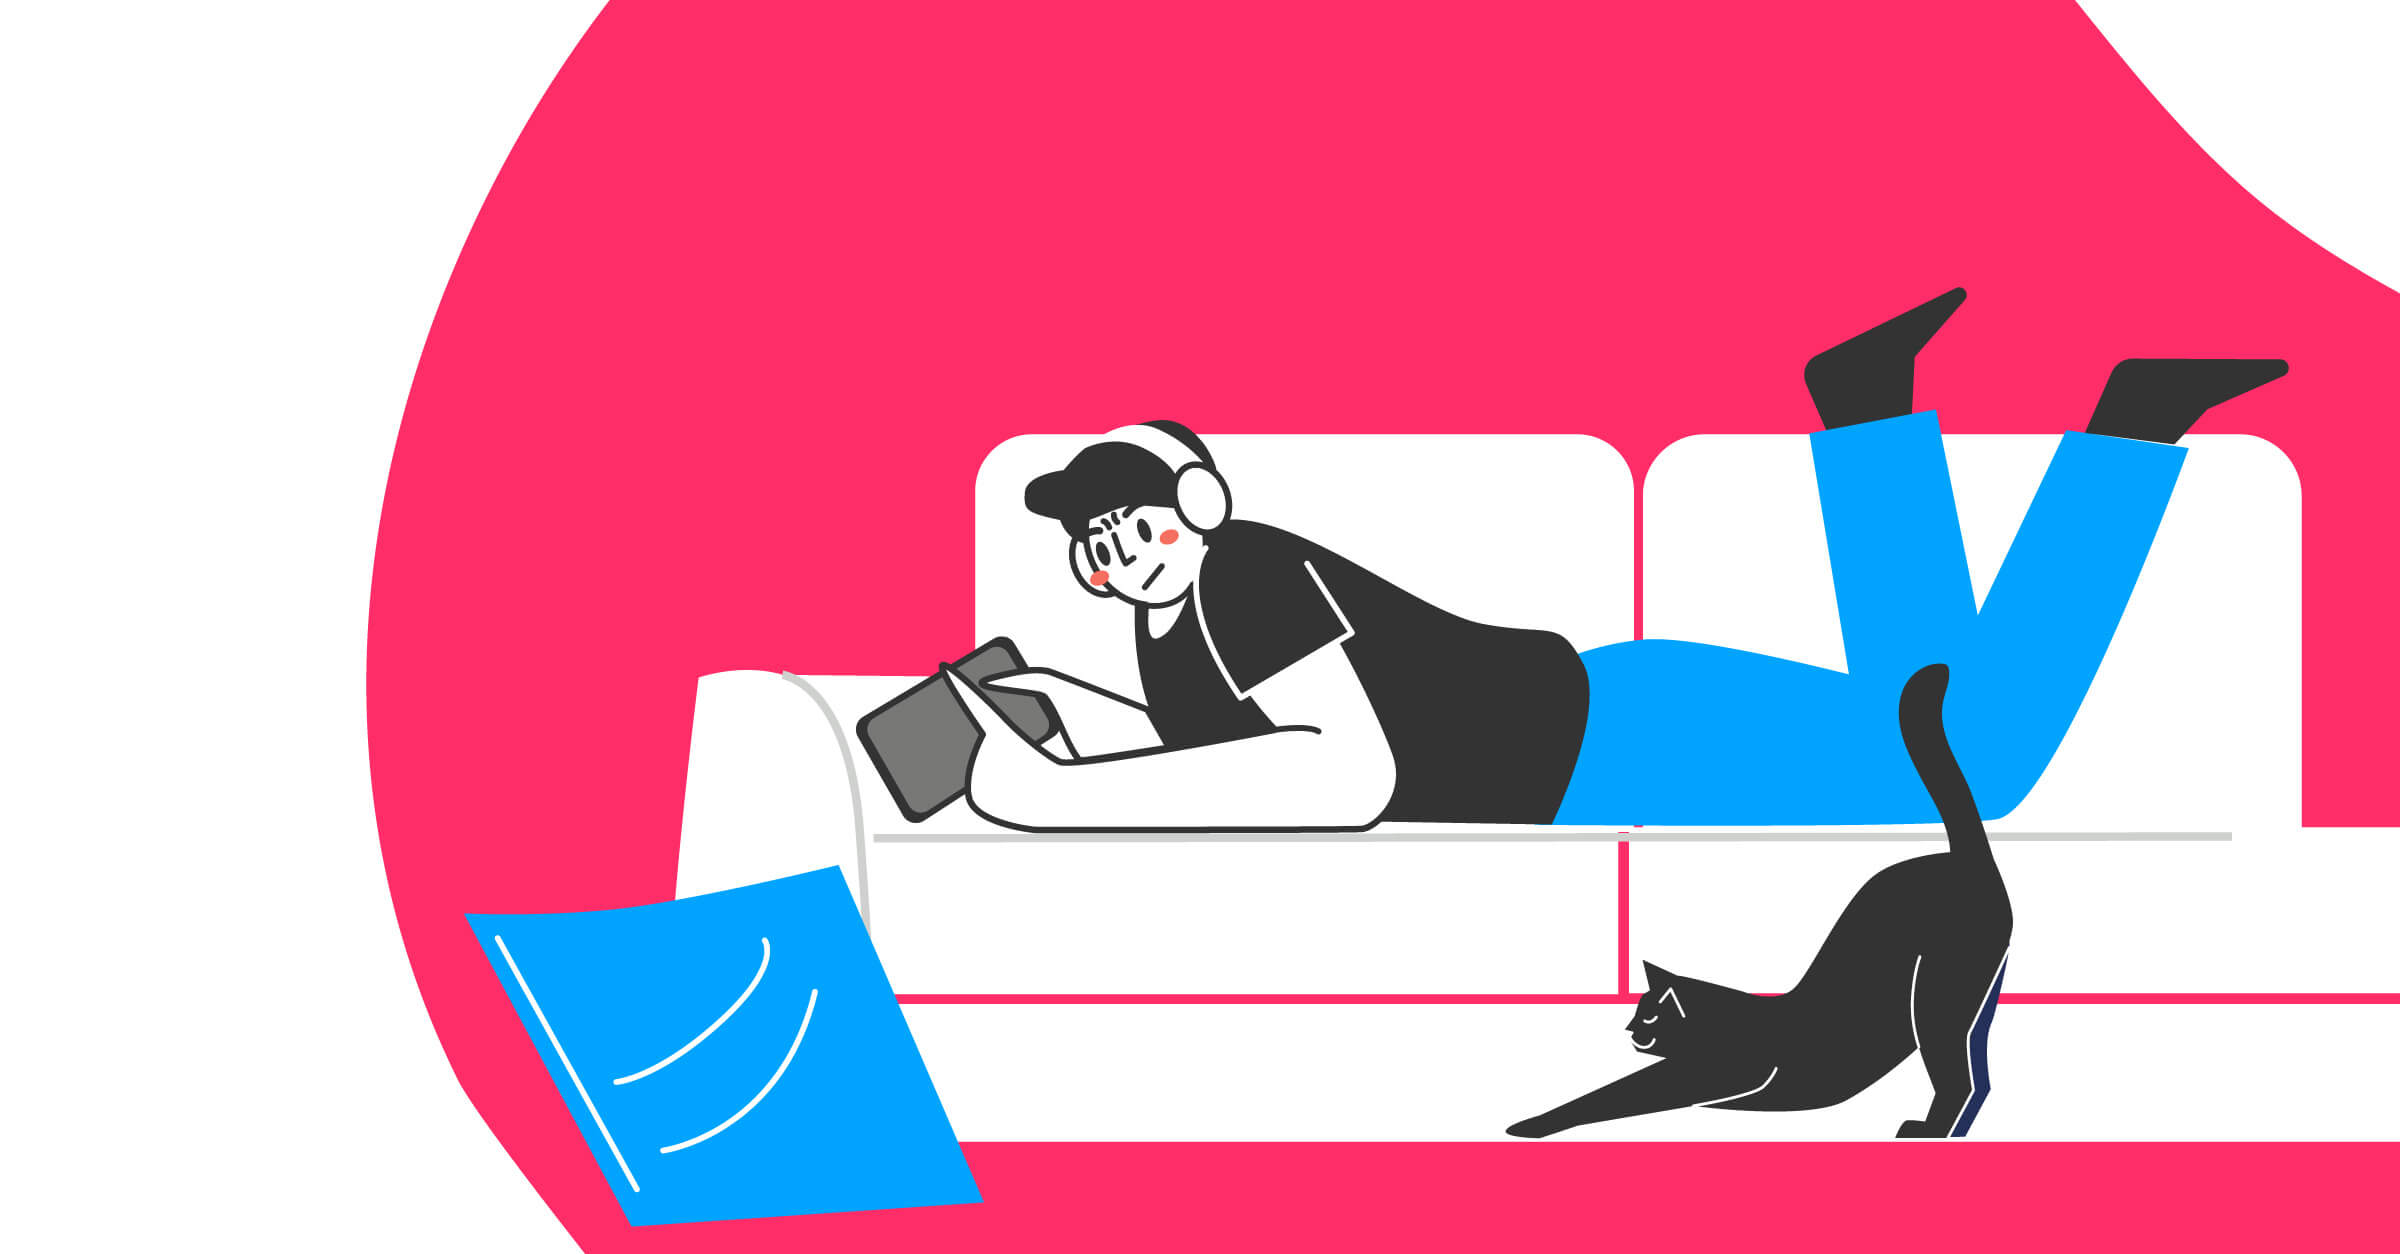 Illustration man on sofa listening to a B2B podcast with headphones